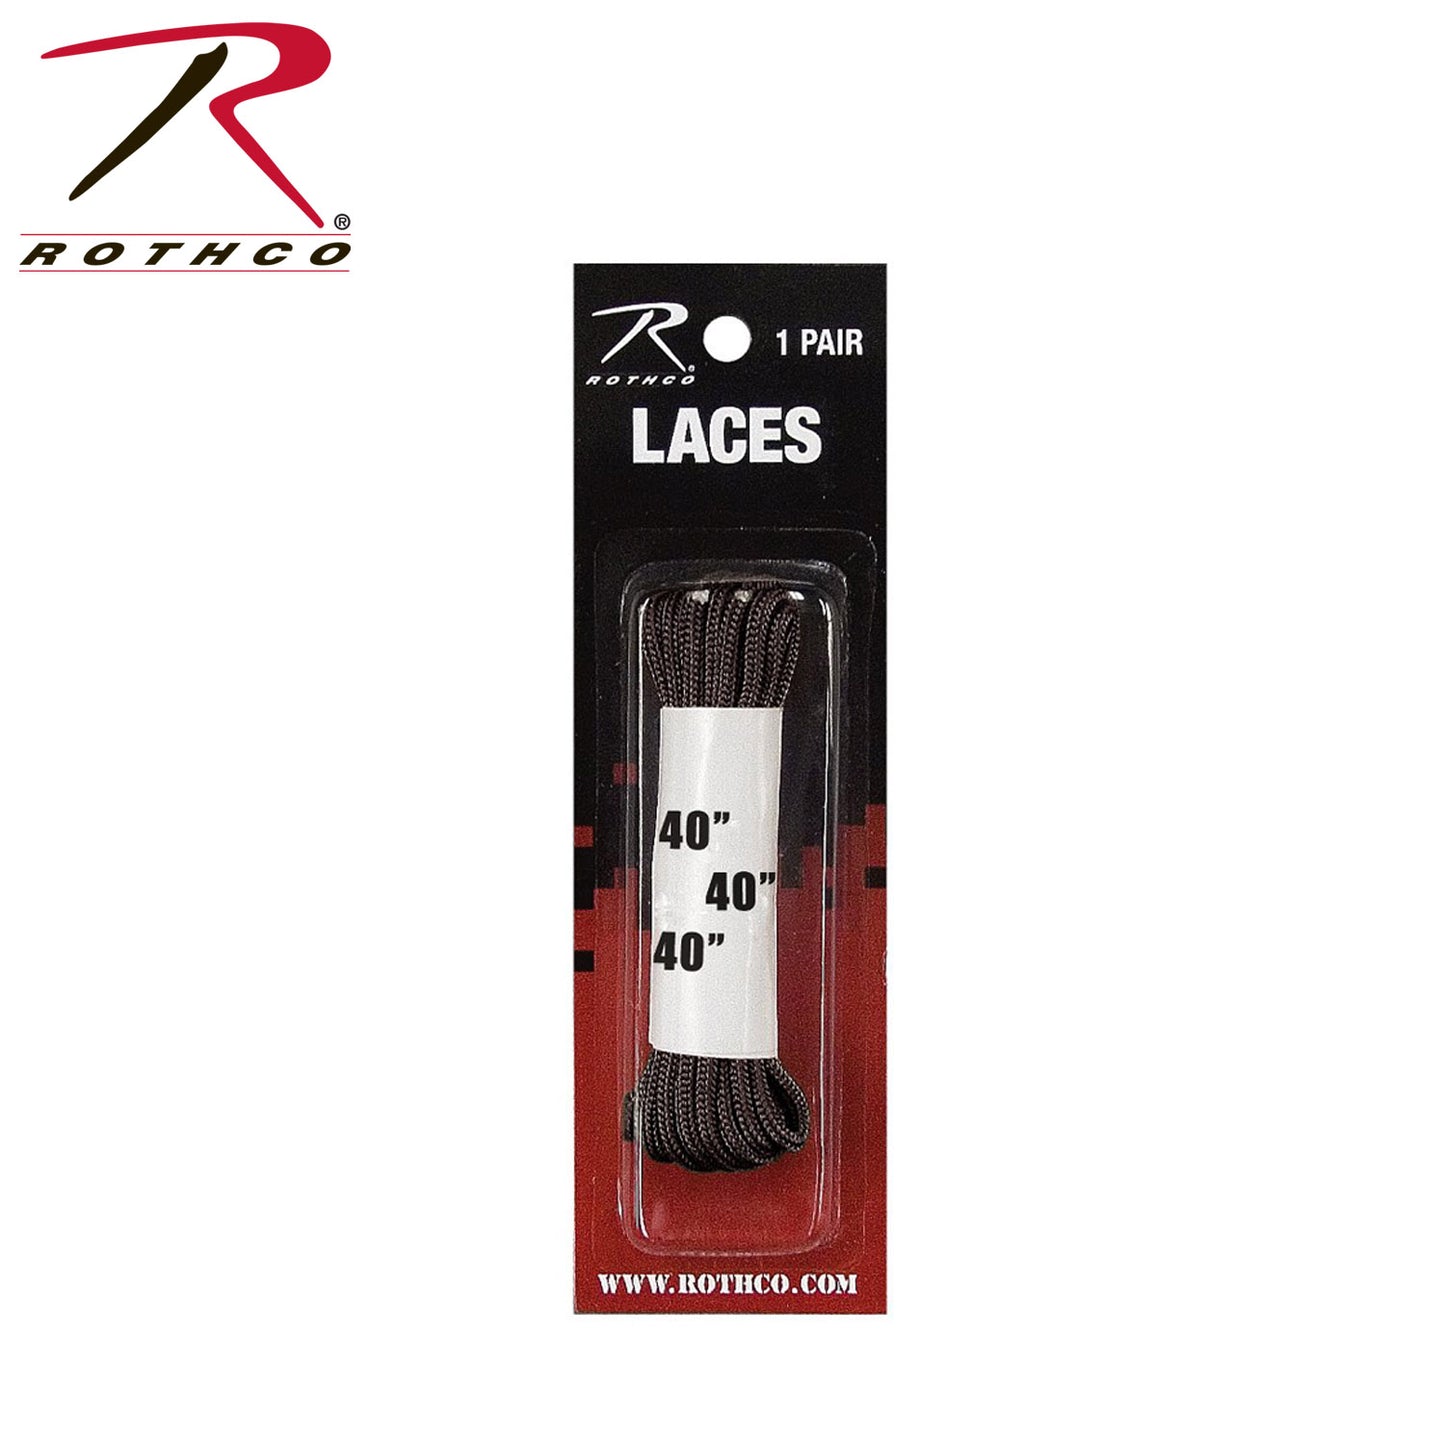 Boot & Shoe Laces From Rothco